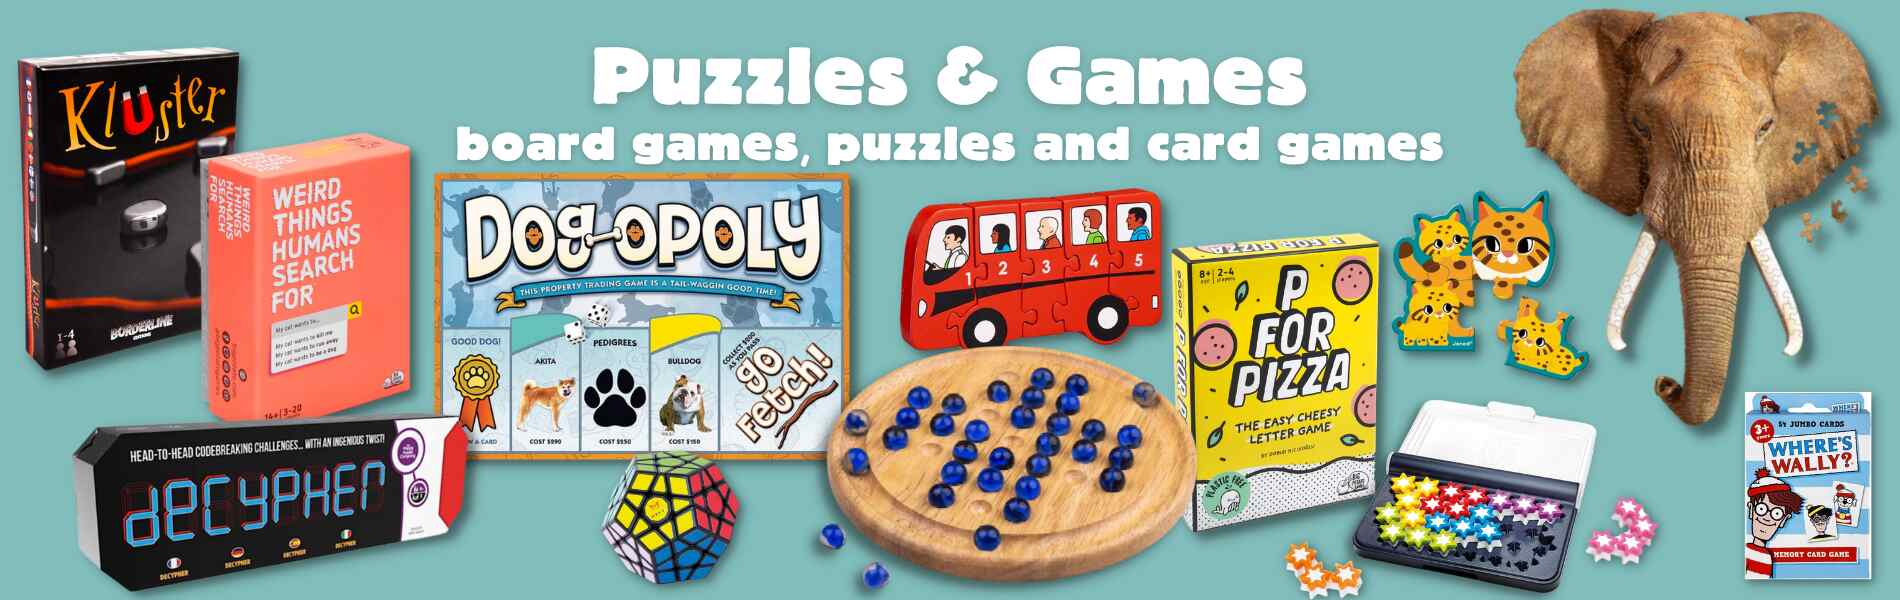 Text that reads: 'puzzles & games' then 'board games, puzzles & card games' surrounded by a large variety of games and puzzles in lcuding a large elephant head jigsaw.